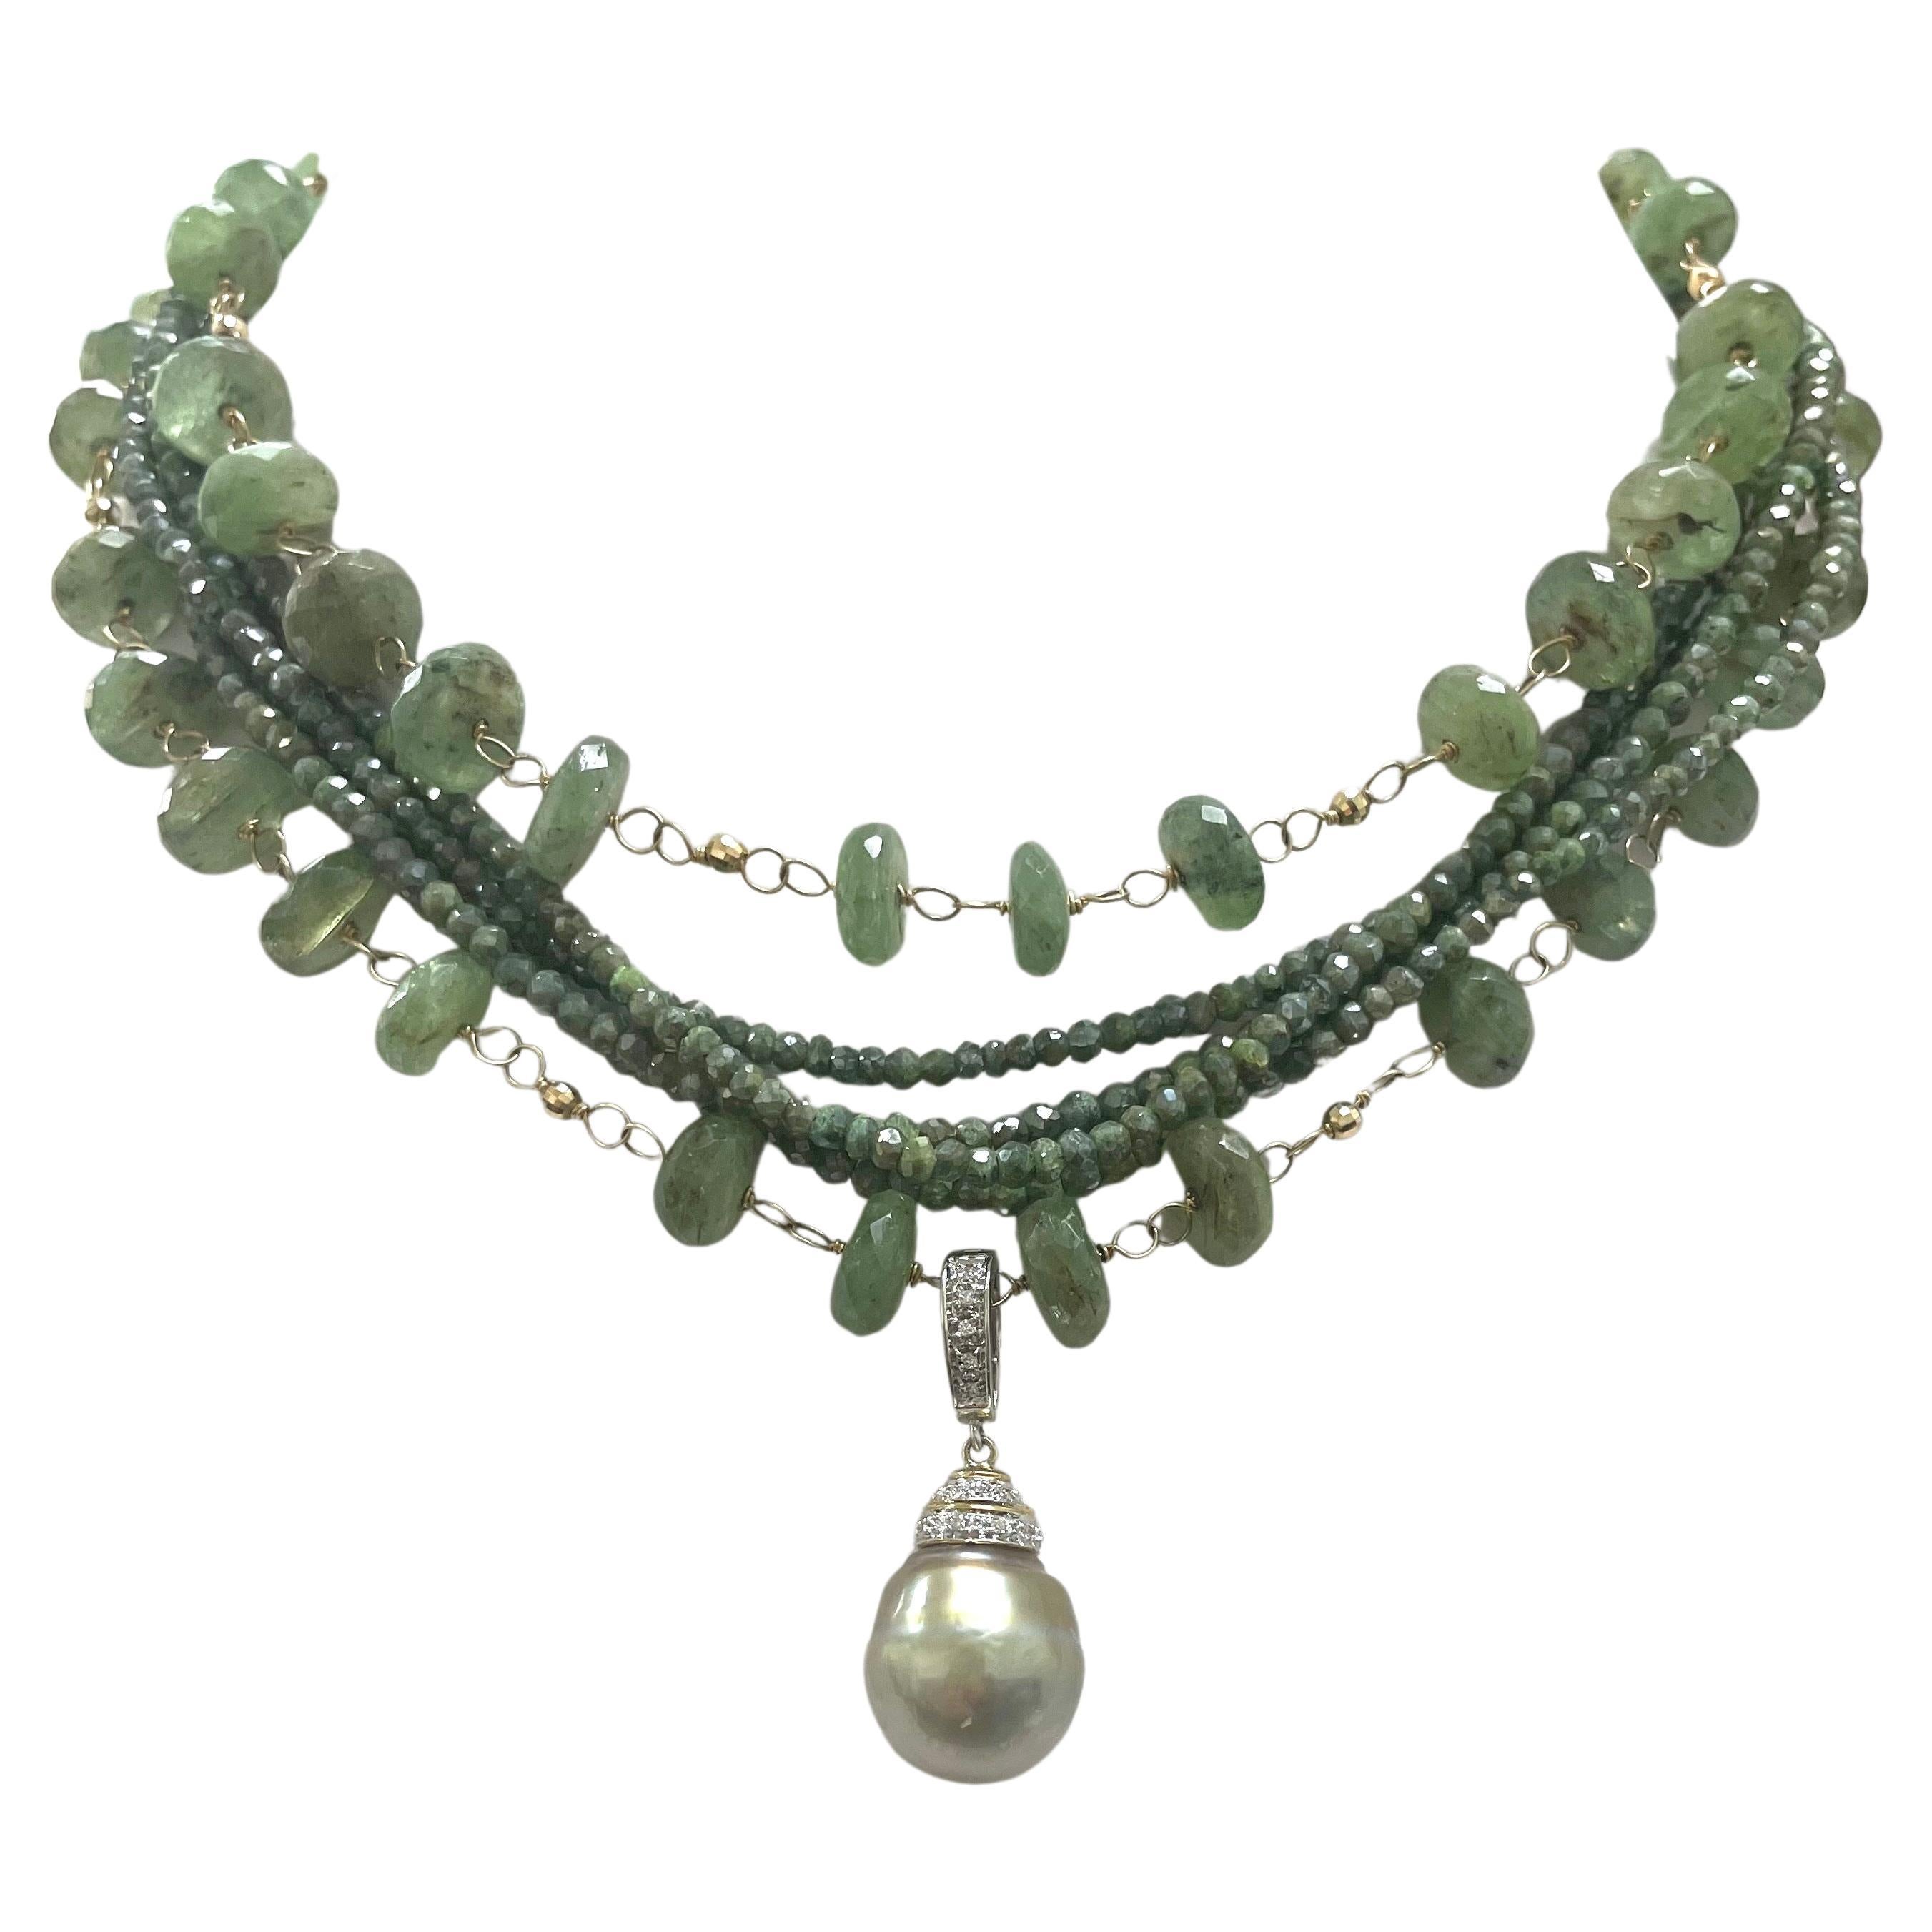 Green Kyanite and Silverite Multistrand Paradizia Necklace with Tahitian Pendant For Sale 6